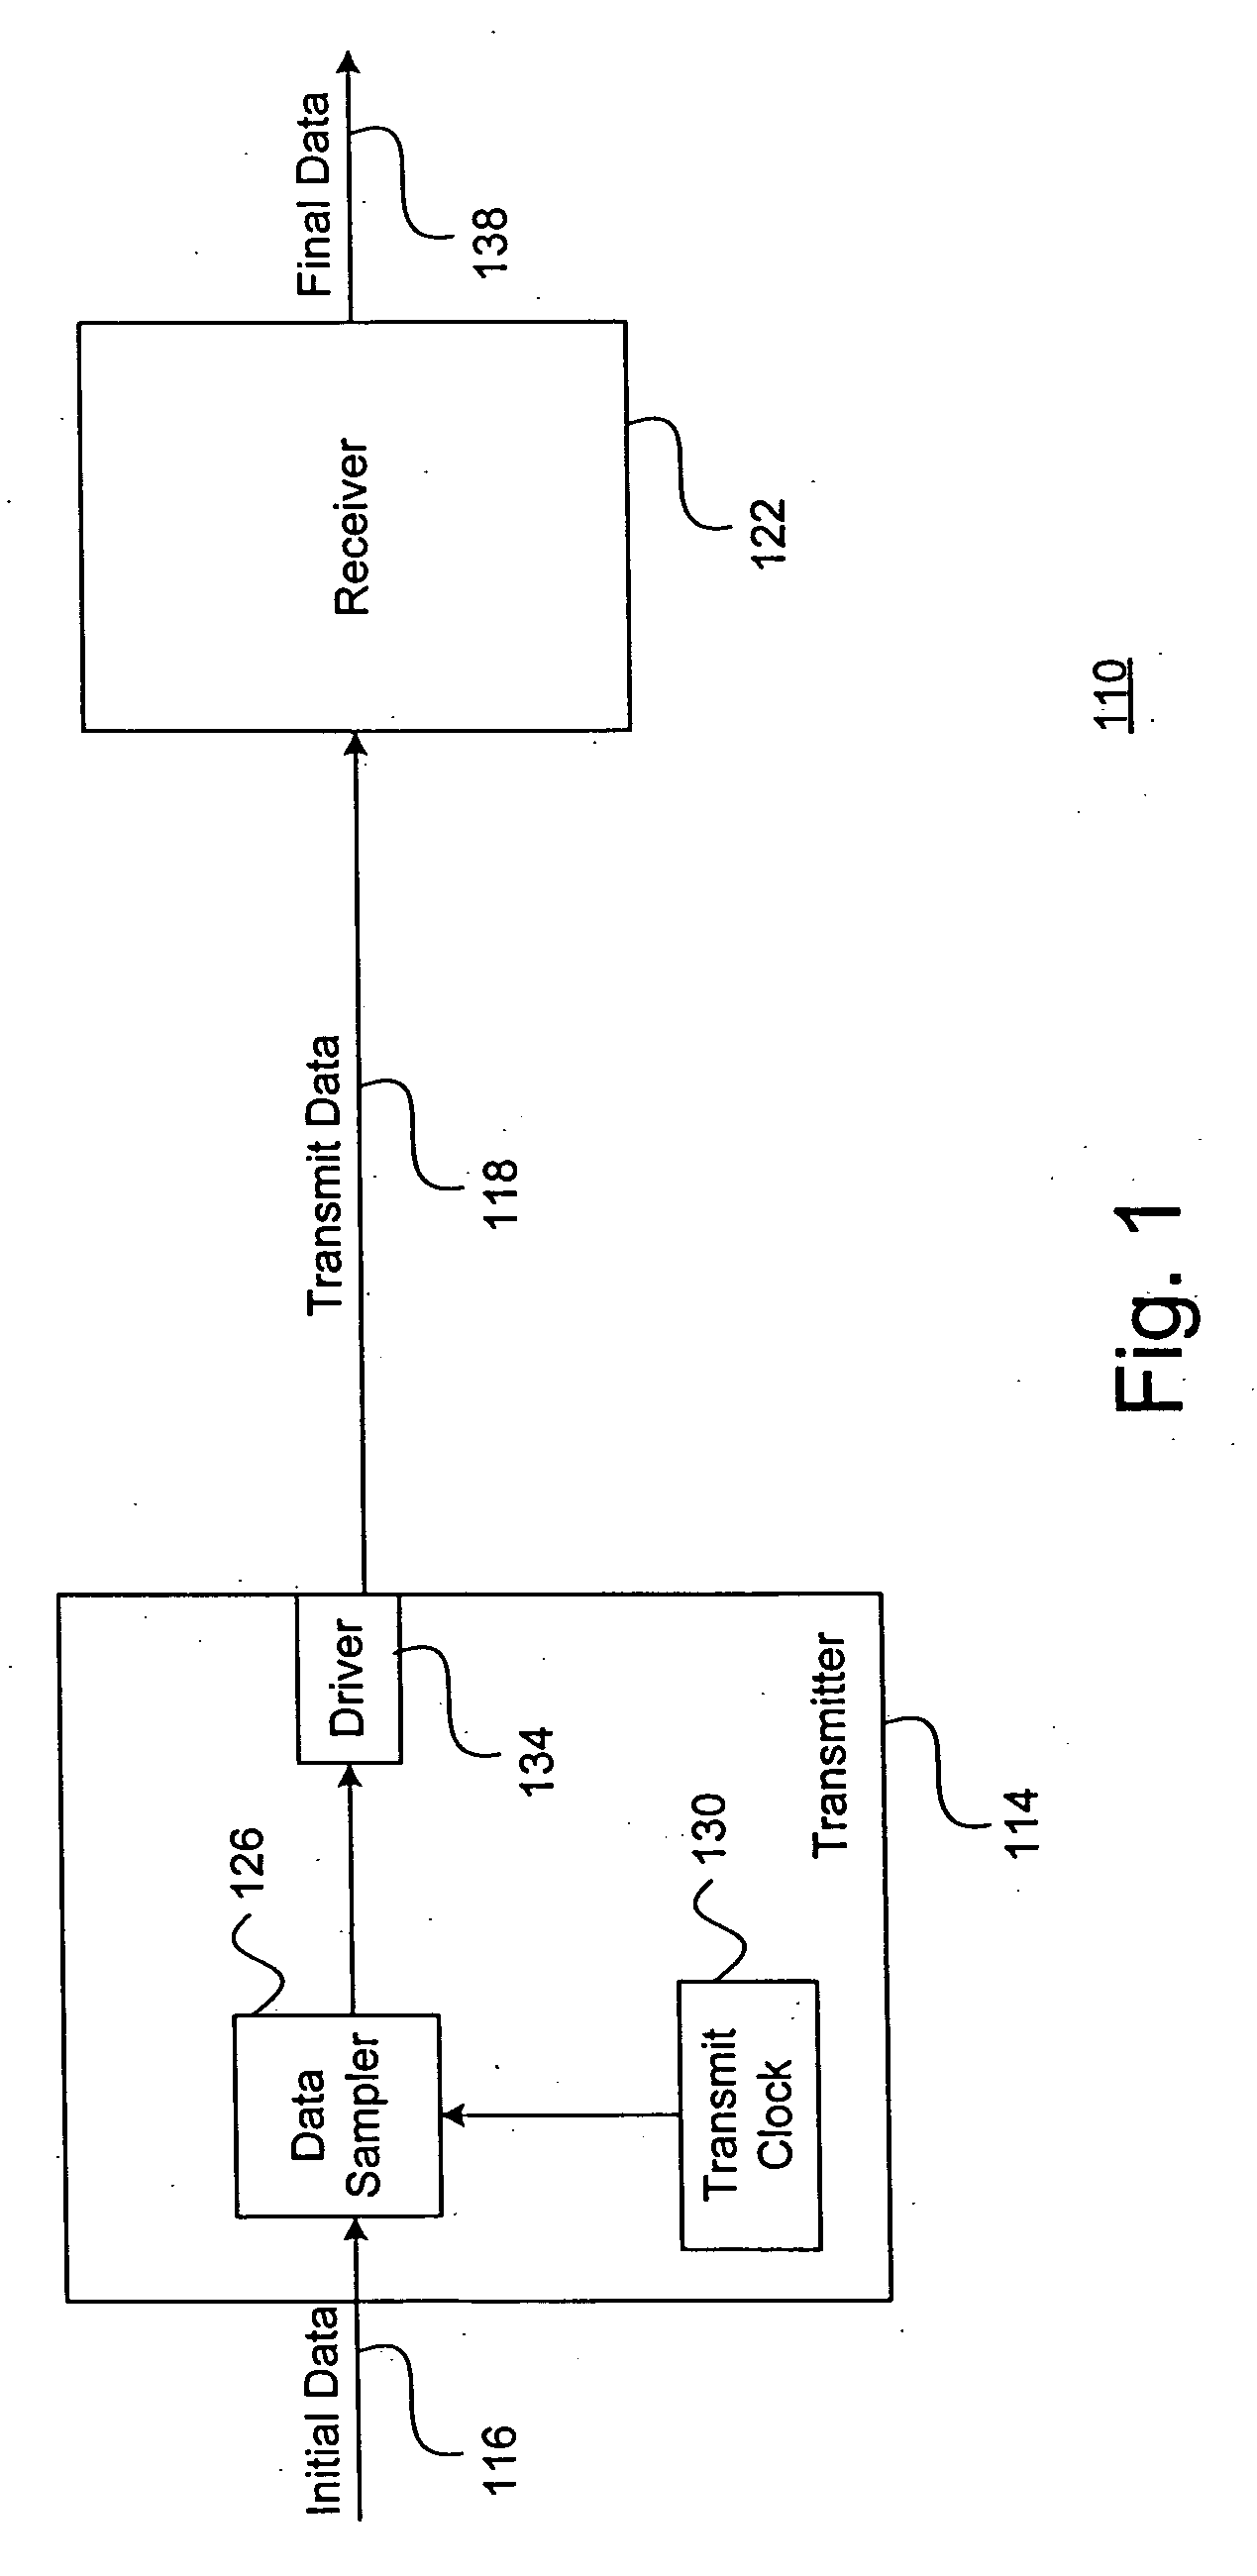 System and method for implementing a phase detector to support a data transmission procedure